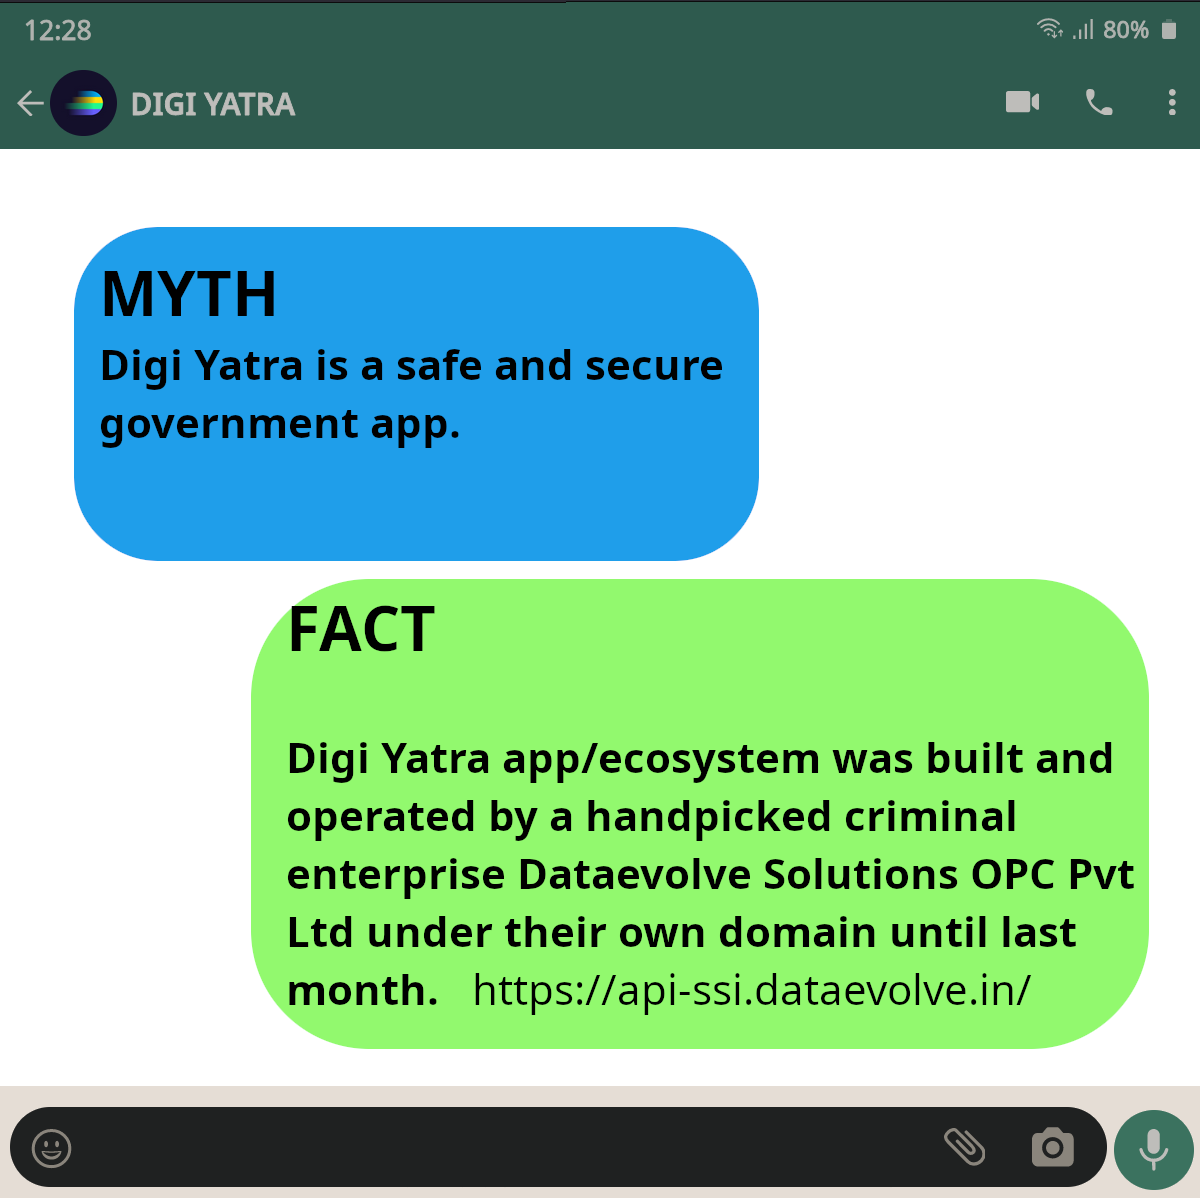 Separating myths from facts! 💡 

Digi Yatra Foundation is a private company with ZERO  accountability to the public under RTI/CAG etc.

Stay informed, stay secure!  

Do NOT Download the Digi Yatra App ever!

Available on IOS and Android. 

#DigiYatra #MythsVsFacts #DataSecurity